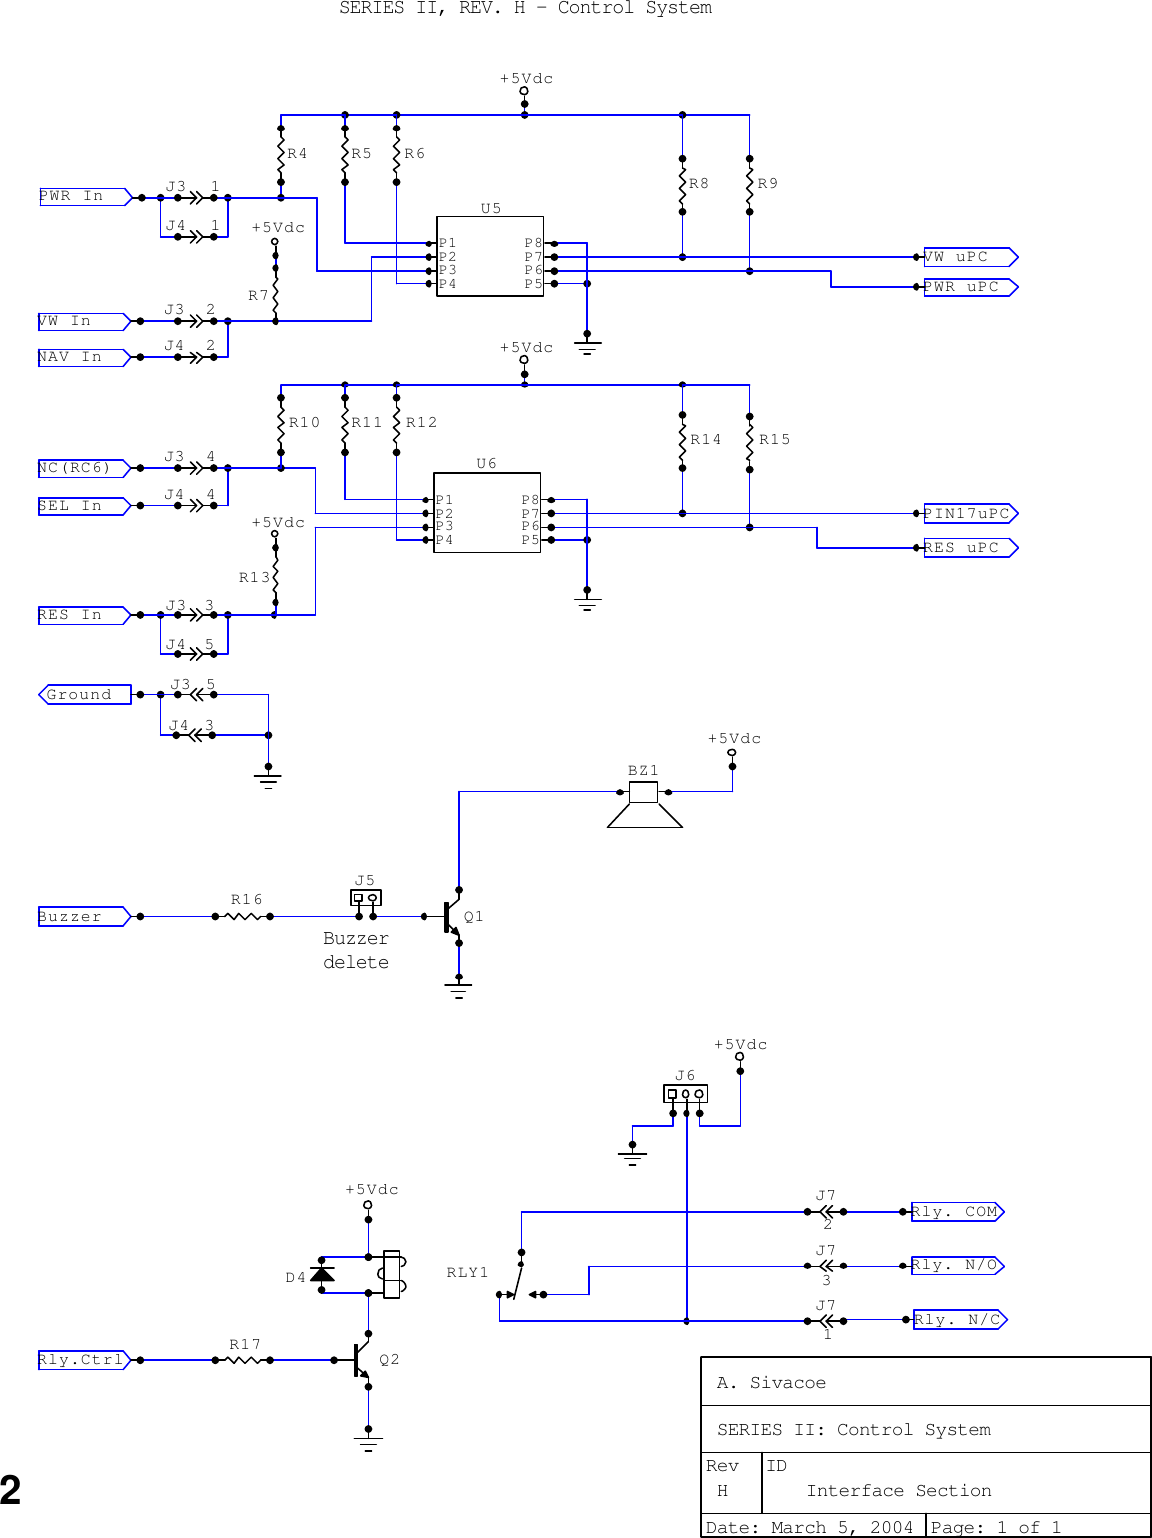 SERIES II, REV. H - Control System2BuzzerdeleteD4J4 3J4 5SEL In   J4 4J4 2NAV In  J4 1+5VdcJ6J3 5Ground  J3 3J3 4J3 2+5Vdc+5VdcR4R17J72Q2Rly.Ctrl+5VdcRLY1Rly. COMRly. N/ORly. N/CJ73J71Buzzer  J5Q1+5VdcR16RES In  NC(RC6) VW In   PWR In   J3 1P1P2P3P4 P5P6P7P8U6P1P2P3P4 P5P6P7P8U5R5 R6R7+5VdcR8 R9VW uPC  PWR uPC R13R10 R11 R12+5VdcR14 R15PIN17uPCRES uPC BZ1A. SivacoeSERIES II: Control SystemH Interface SectionDate: March 5, 2004 Page: 1 of 1Rev ID